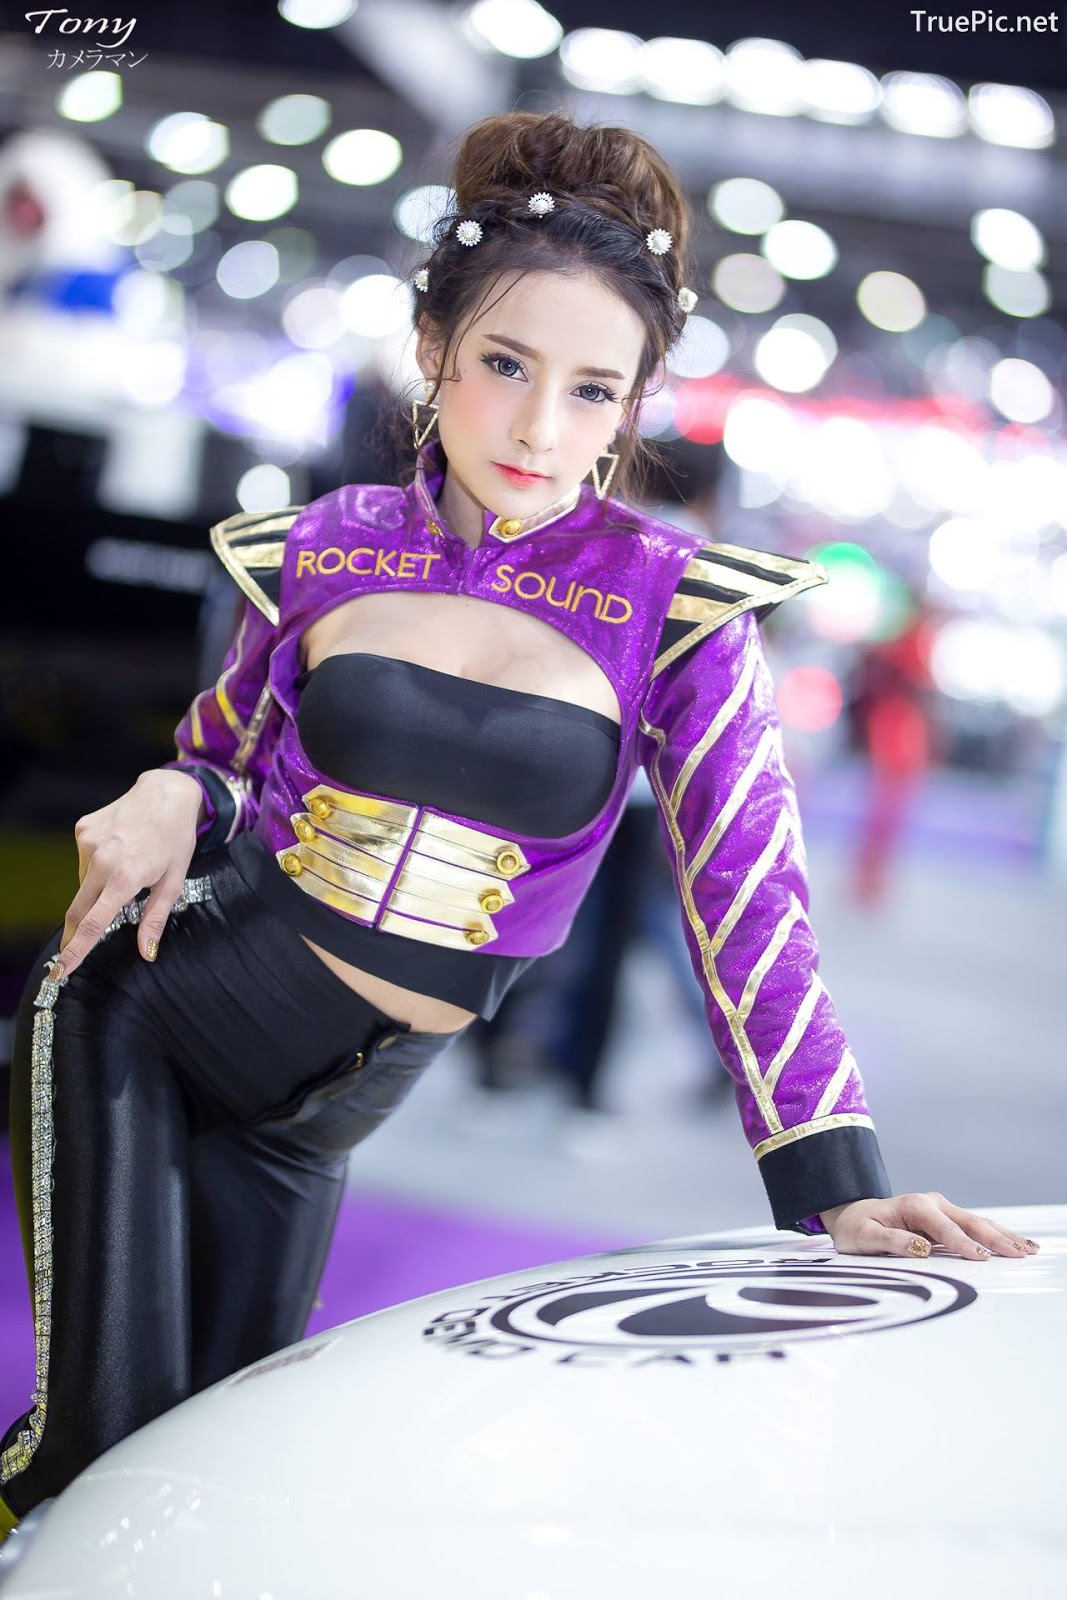 Image-Thailand-Hot-Model-Thai-Racing-Girl-At-Motor-Expo-2018-TruePic.net- Picture-102